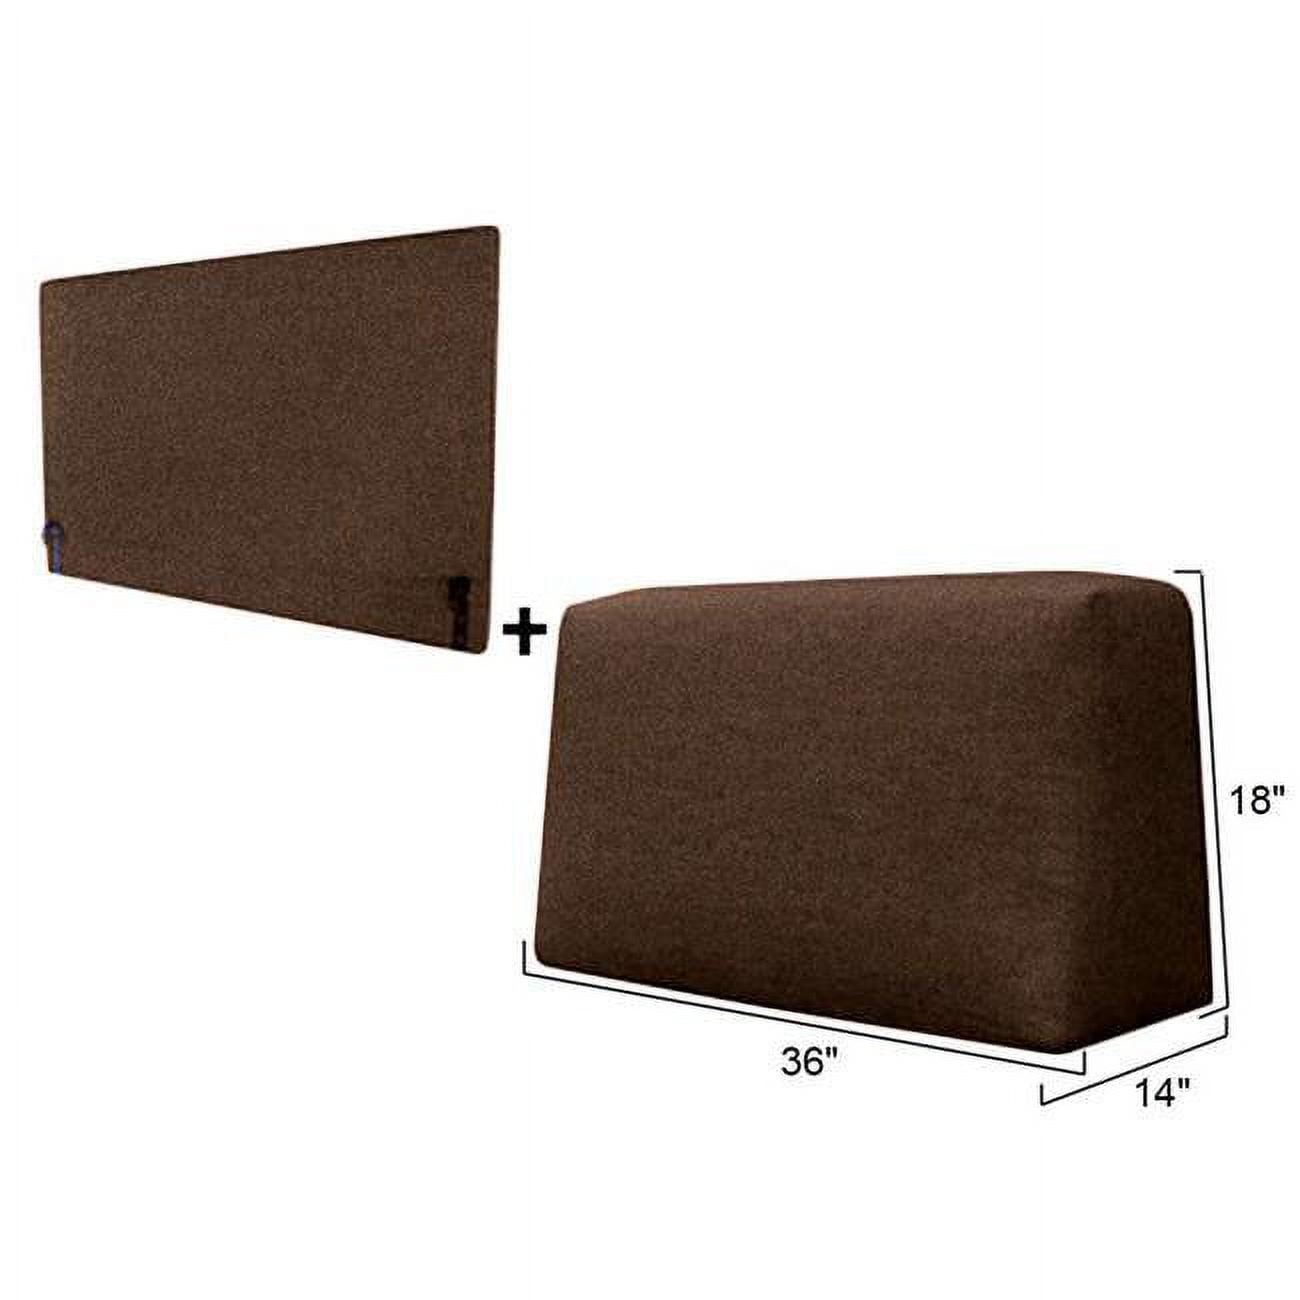 Sbbs-es Sofa Back Pillow & Back Support Package - Brown